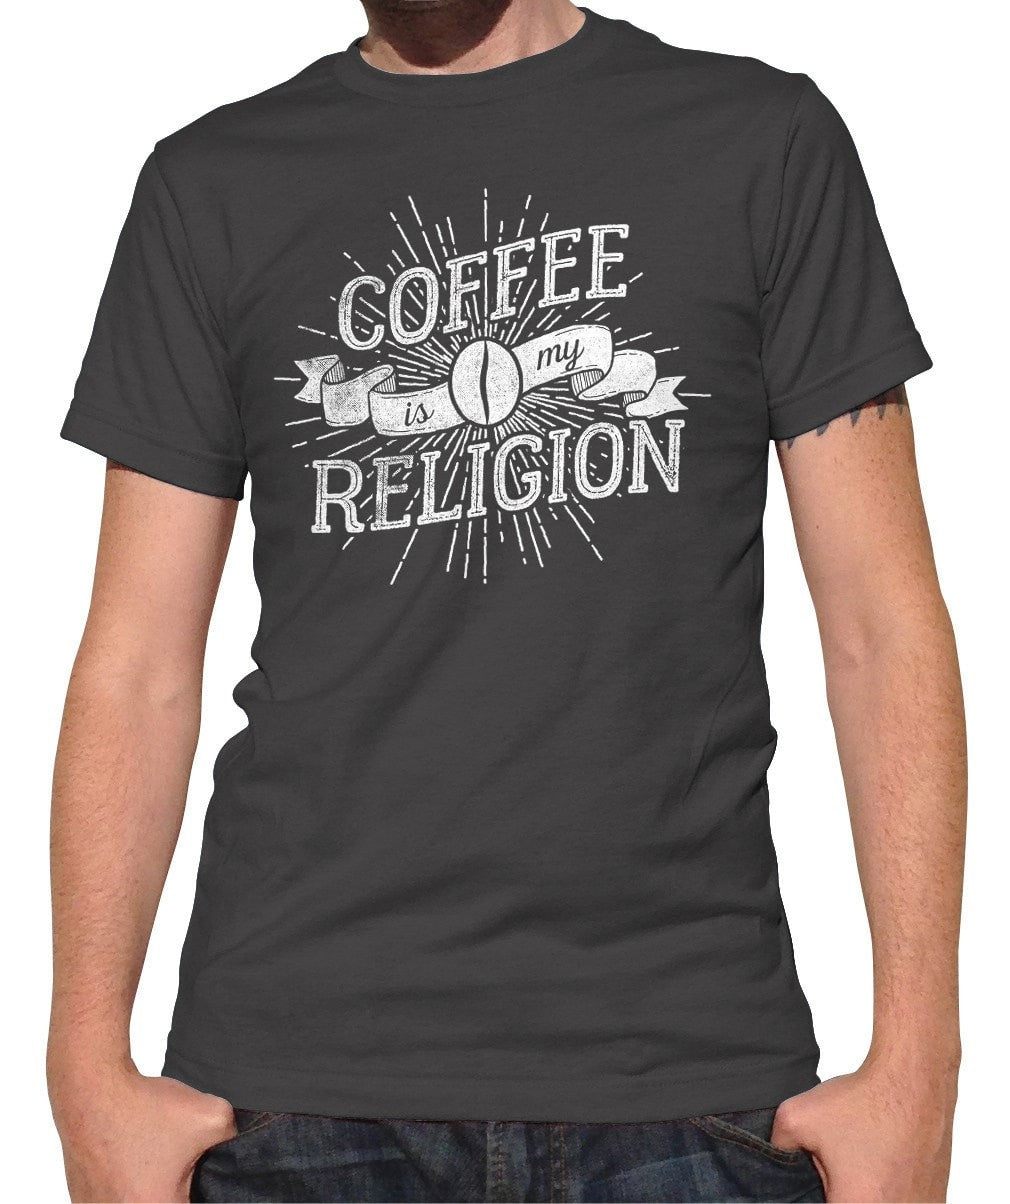 Men's Coffee Is My Religion T-Shirt